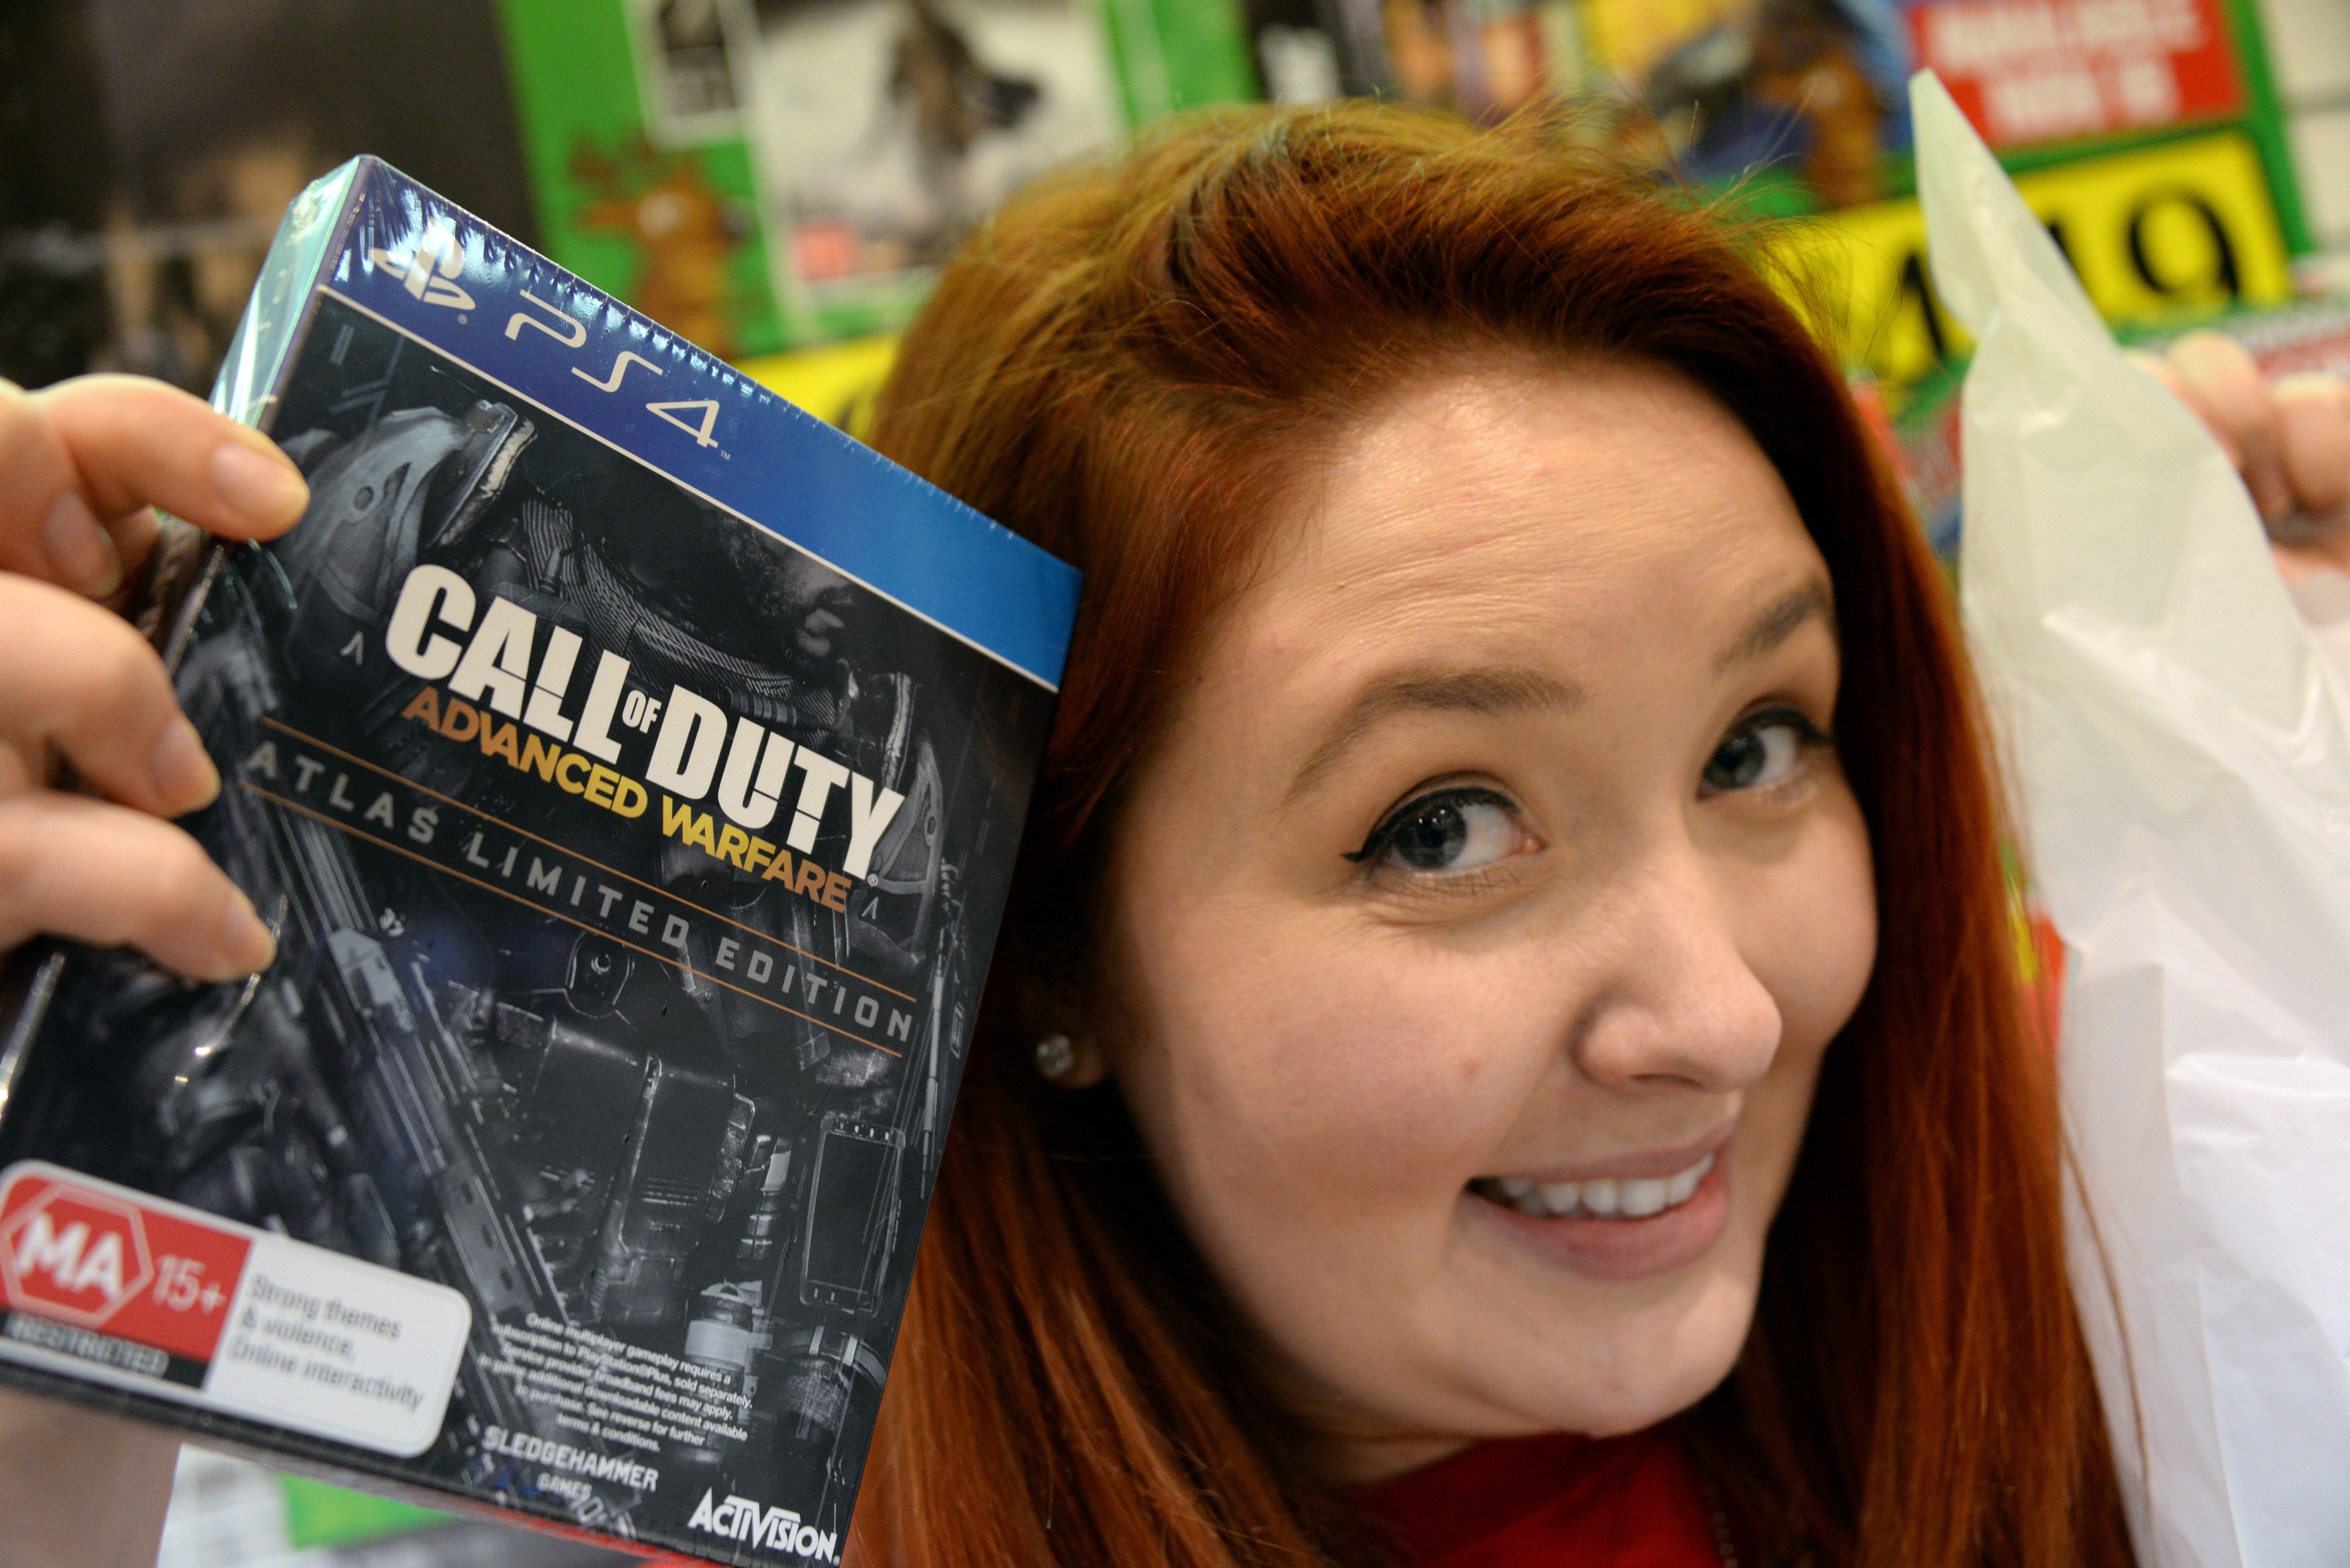 A shopper poses with the newest instalment of the "Call of Duty" videogame at a midnight launch of per-ordered copies of the game in Sydney on Nov. 3, 2014. (Saeed Khan—AFP/Getty Images)